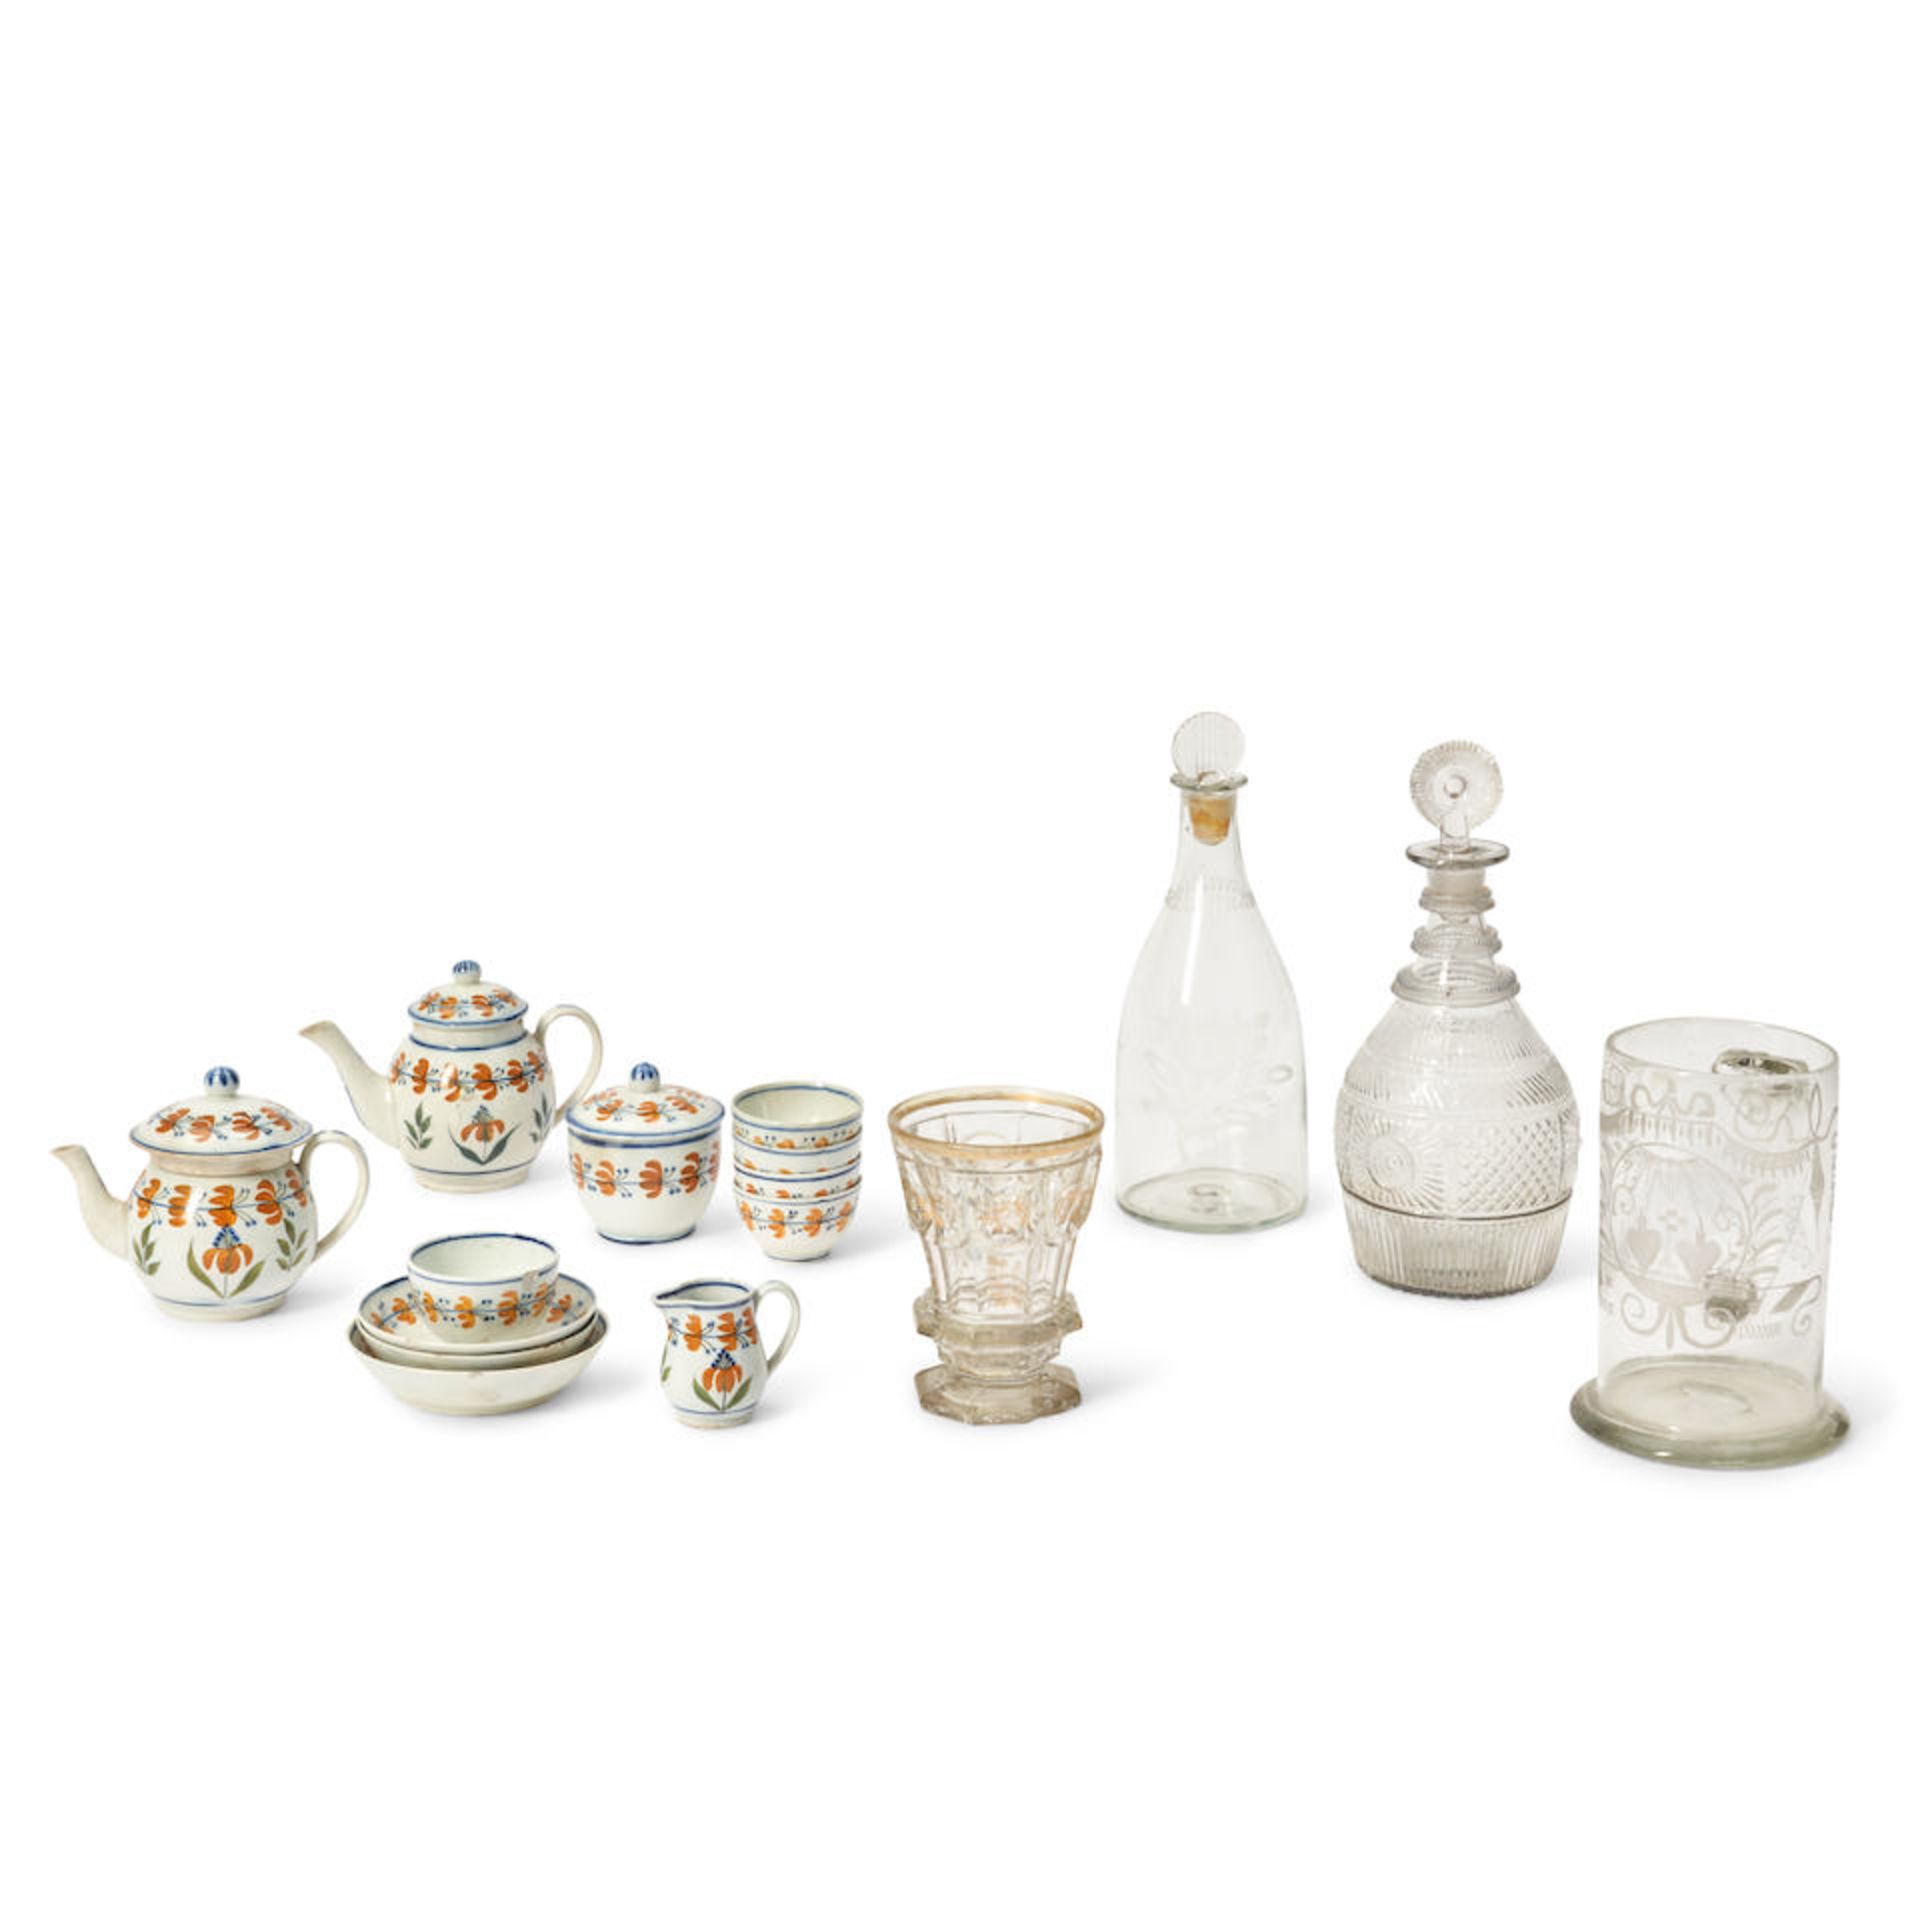 GROUP OF PEARLWARE TEA SERVICE ITEMS AND FOUR COLORLESS GLASS ITEMS